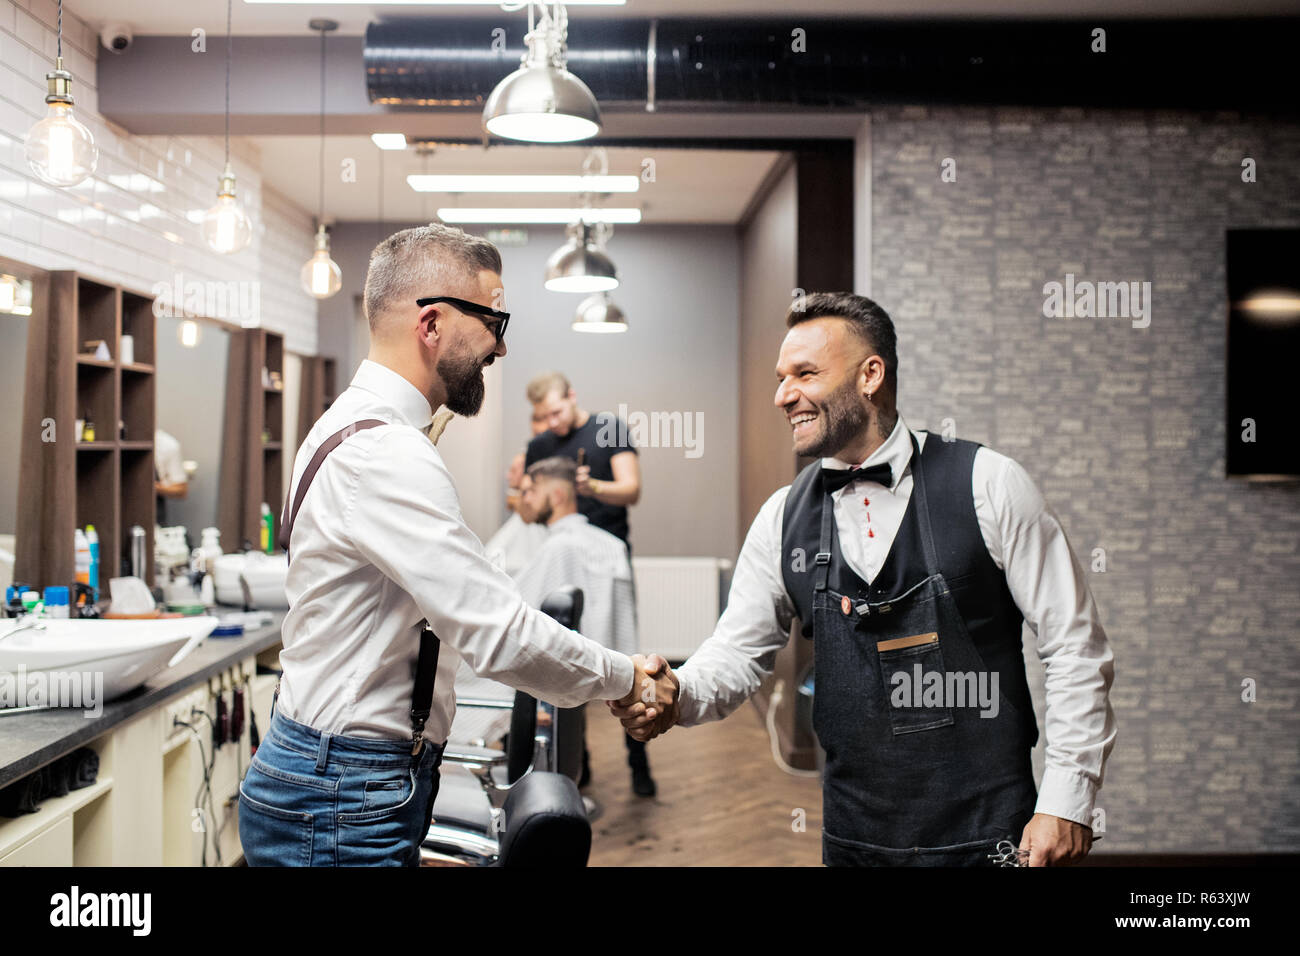 Hipster man client shaking hands with haidresser and hairstylist in barber shop. Stock Photo